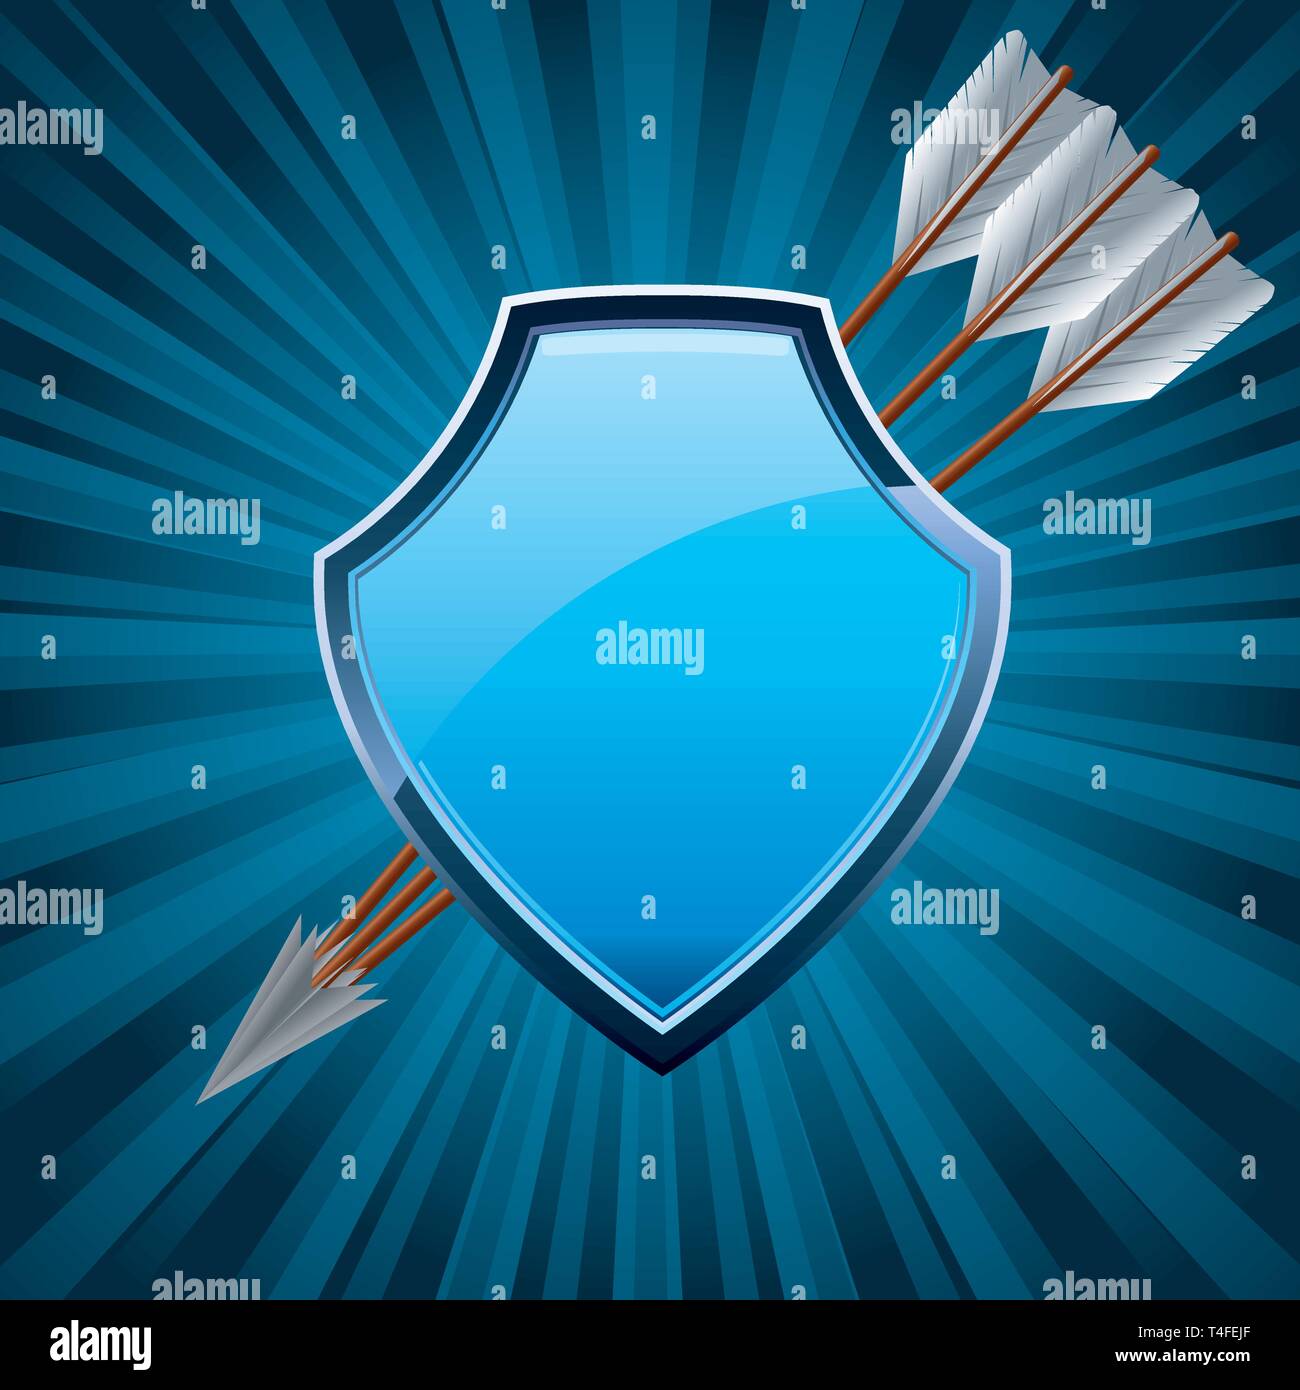 Security shield, coat of arms symbol icon, decorated with arrows, blue vector illustration Stock Vector